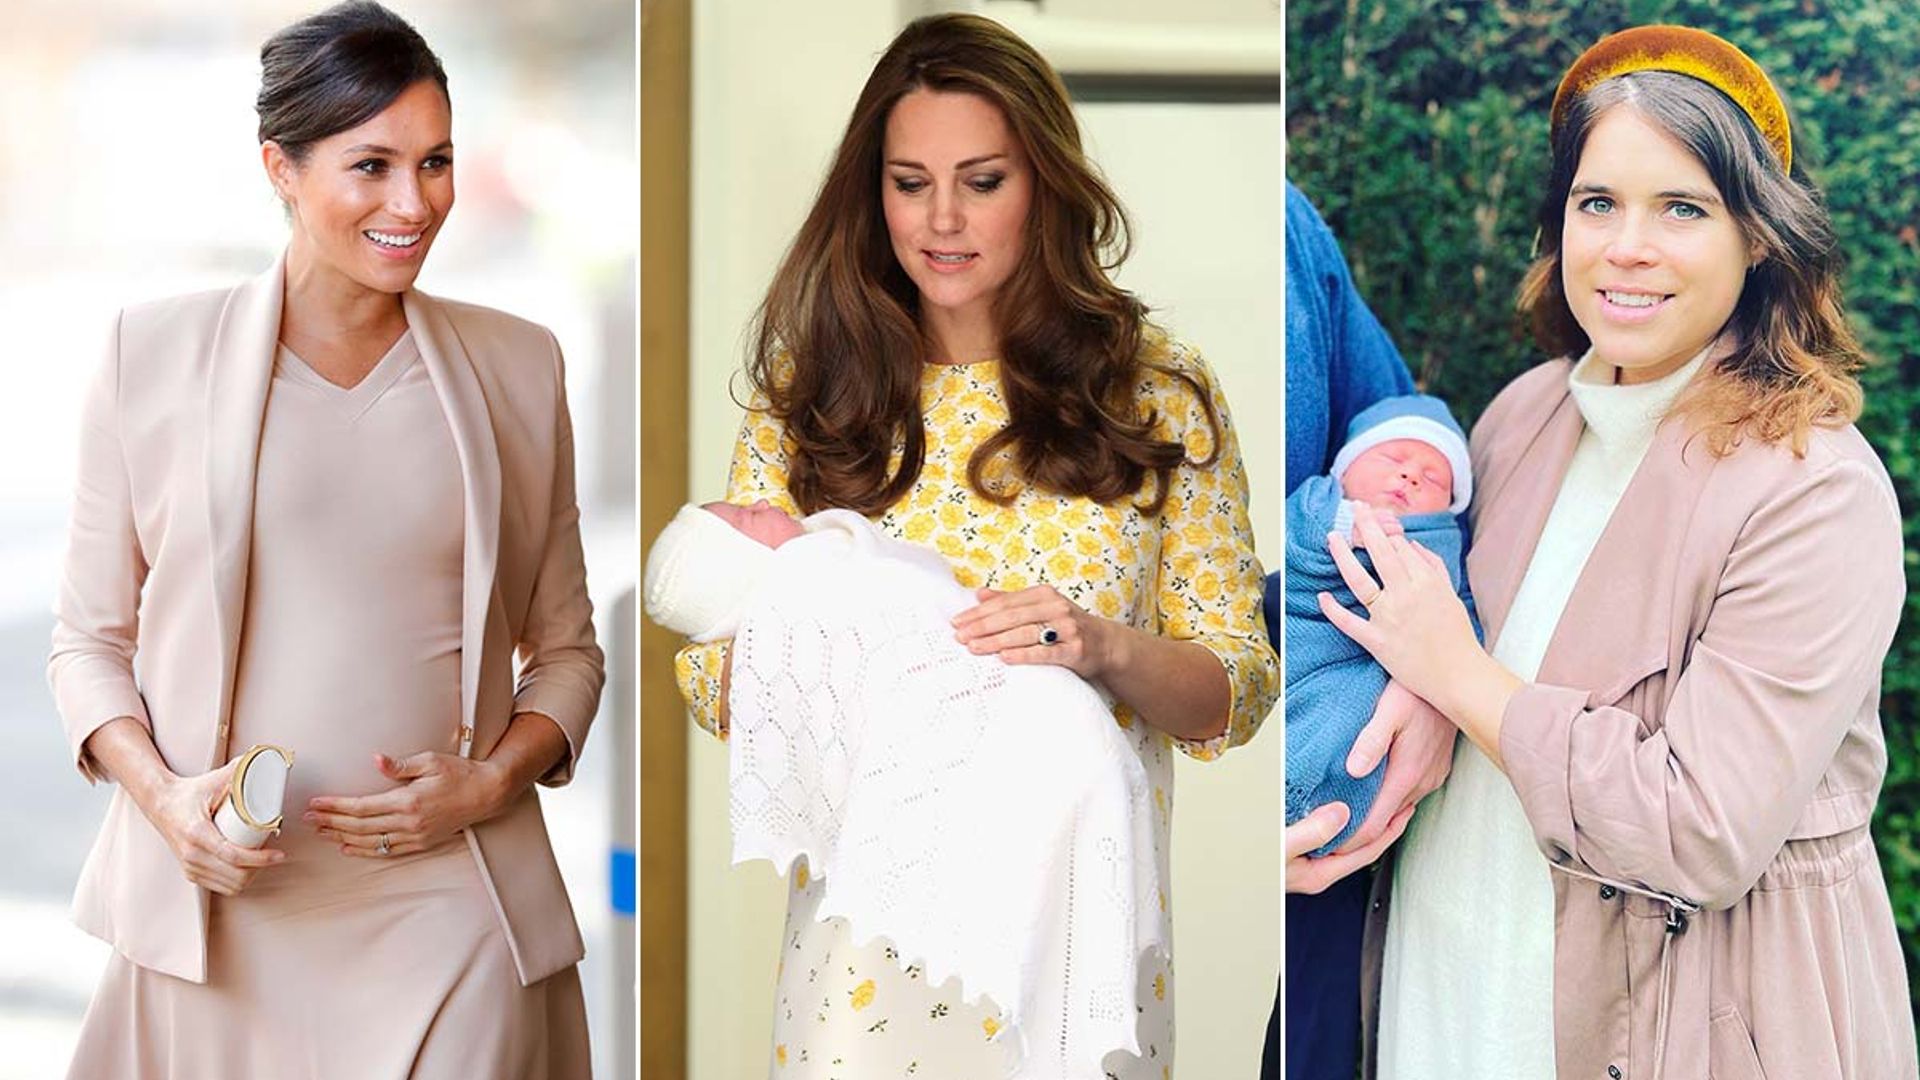 Royal mums' £6.7k post-birth recovery room service is like a five-star hotel